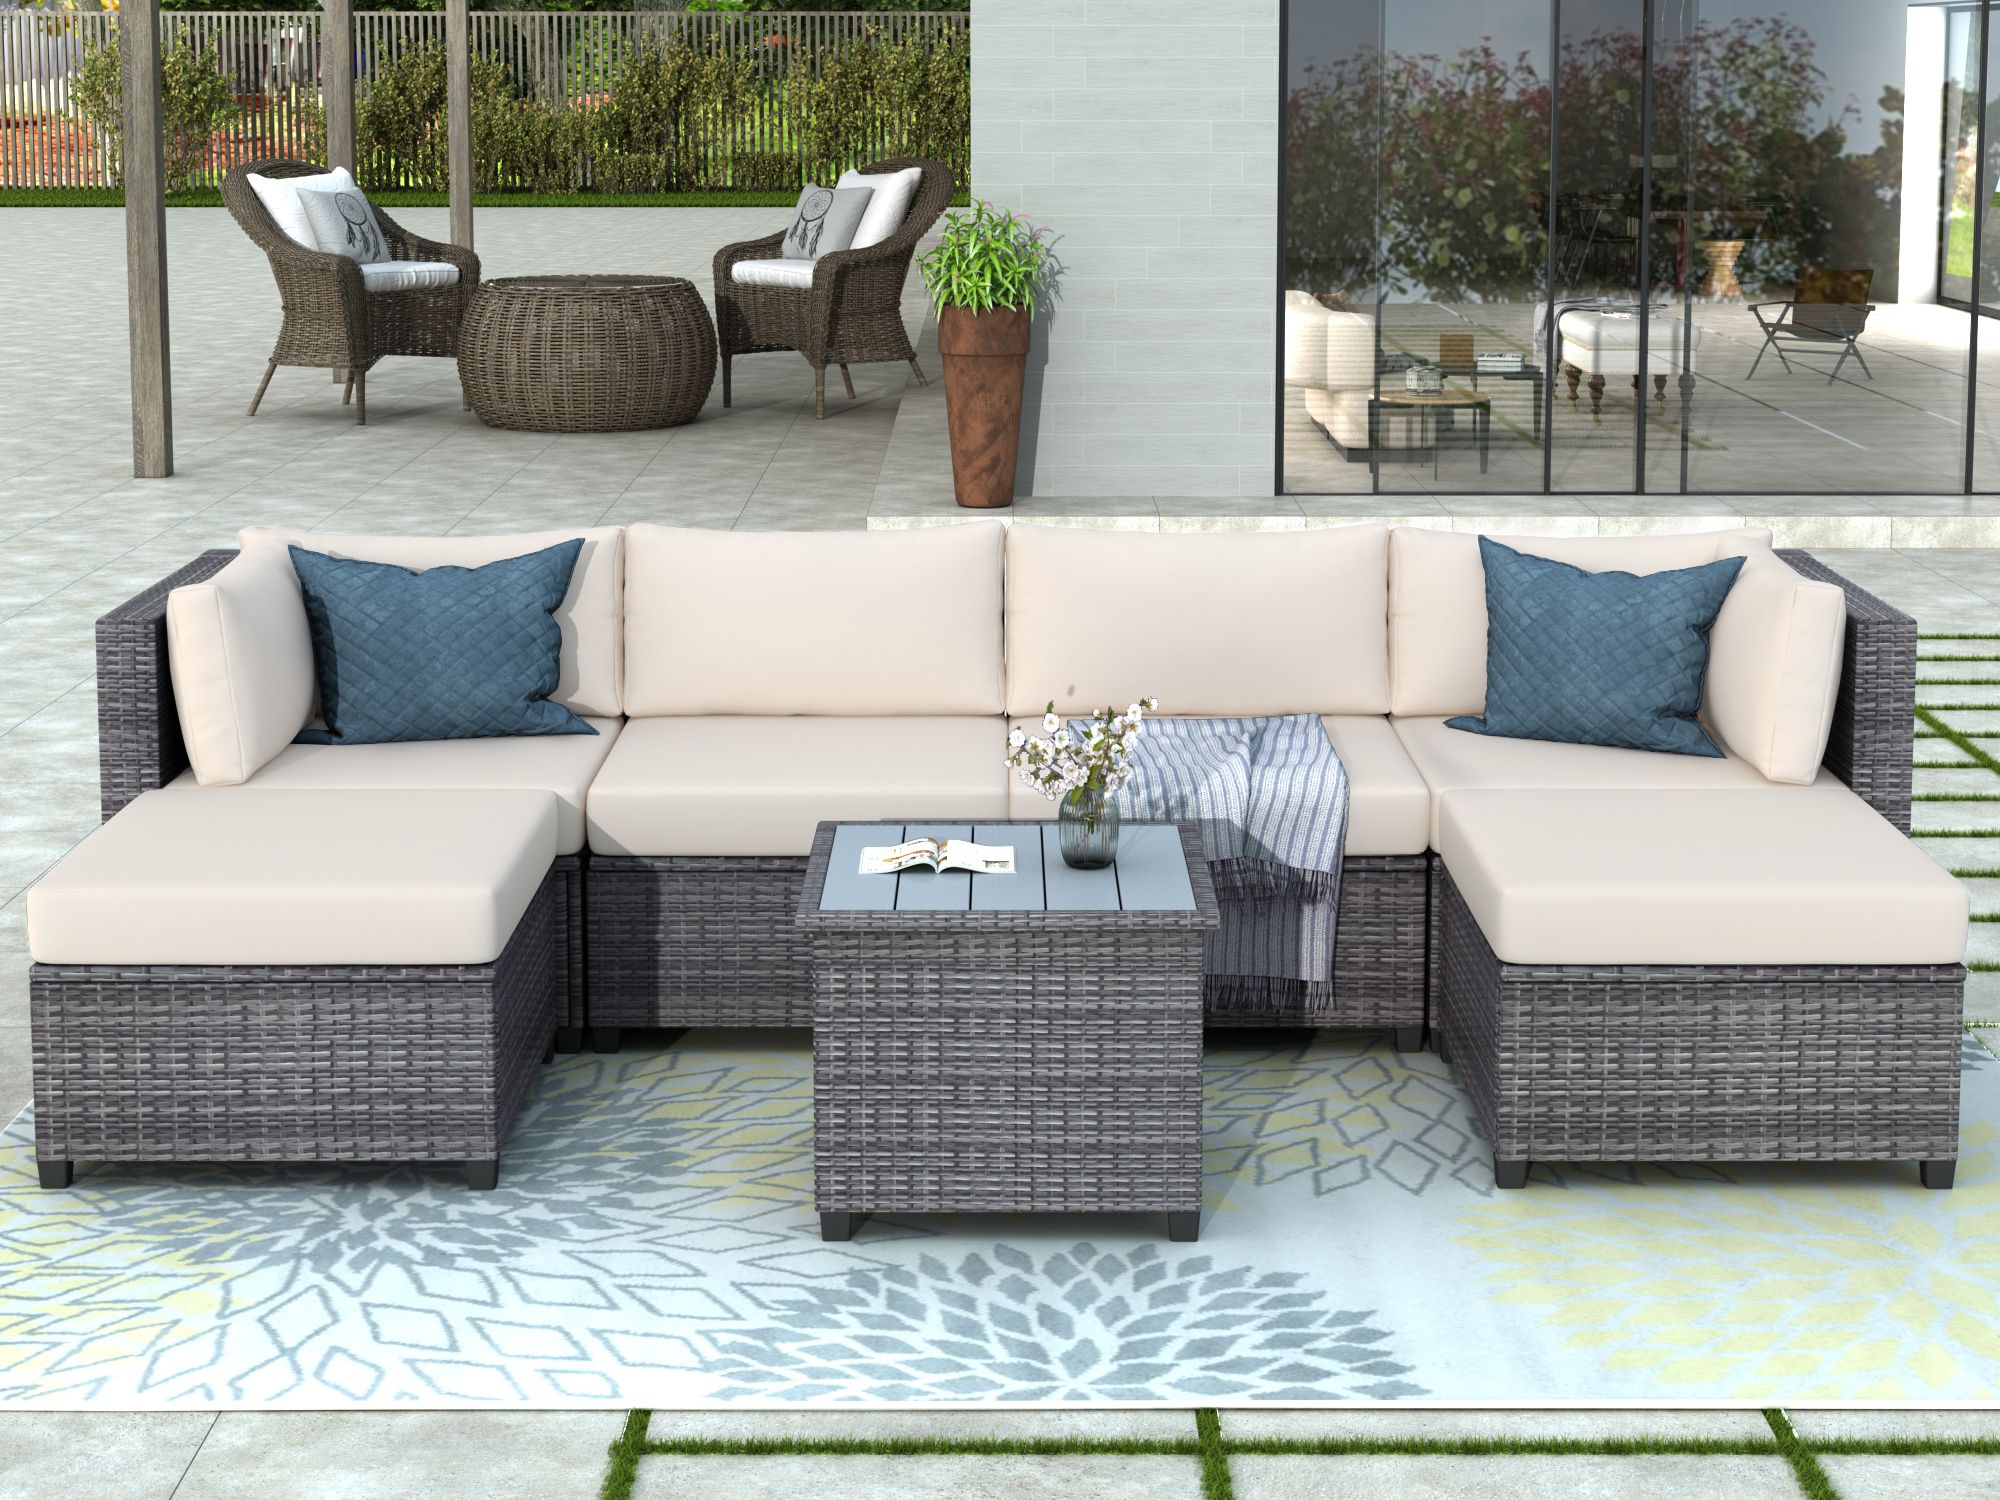 Wicker Beige Cushion Outdoor Patio Sets Within Most Recent Wicker Bistro Patio Sets, 7 Piece Rattan Outdoor Patio Furniture, Patio (View 4 of 15)